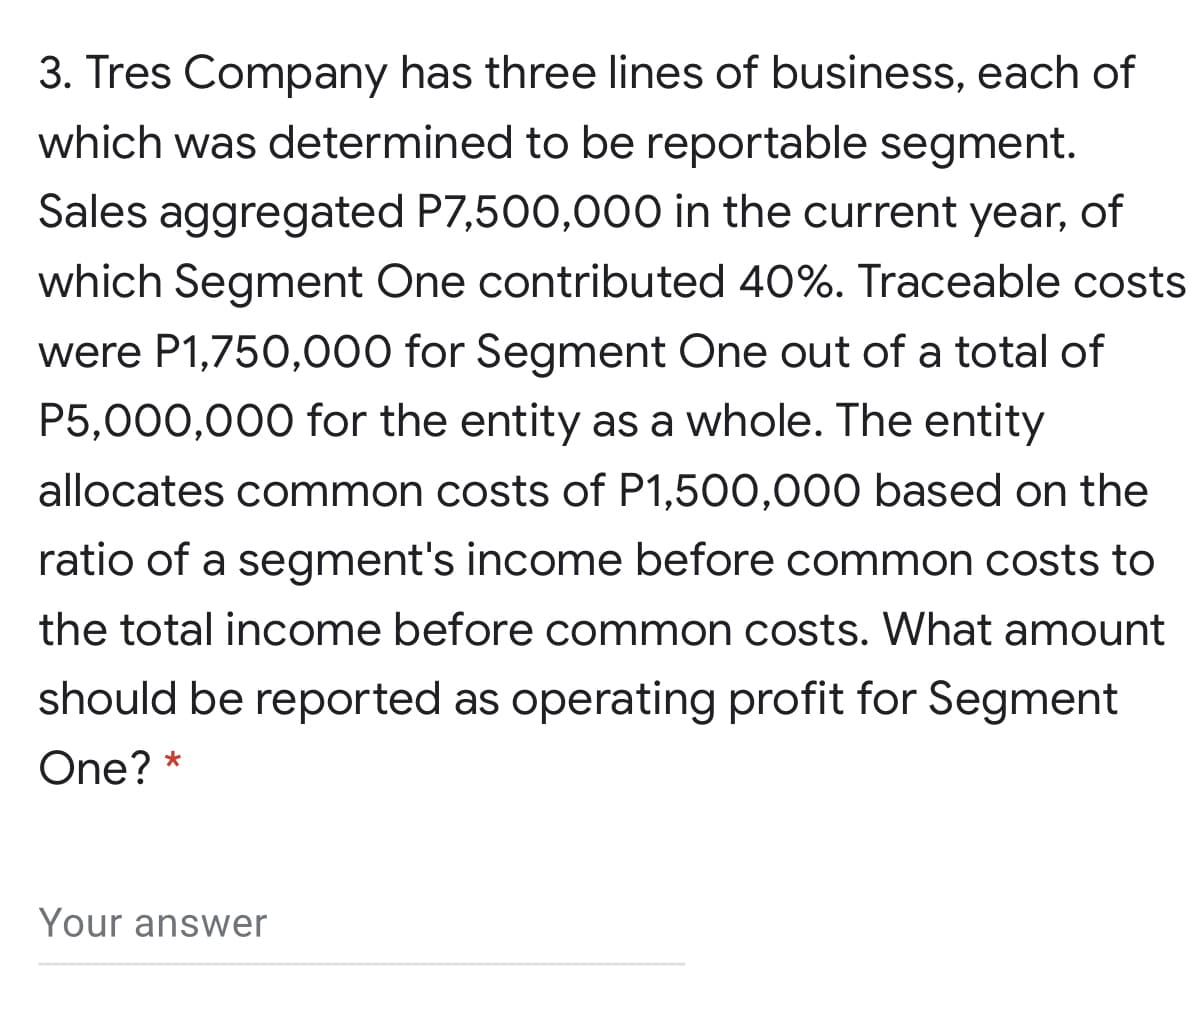 3. Tres Company has three lines of business, each of
which was determined to be reportable segment.
Sales aggregated P7,500,000 in the current year, of
which Segment One contributed 40%. Traceable costs
were P1,750,000 for Segment One out of a total of
P5,000,000 for the entity as a whole. The entity
allocates common costs of P1,500,000 based on the
ratio of a segment's income before common costs to
the total income before common costs. What amount
should be reported as operating profit for Segment
One? *
Your answer
